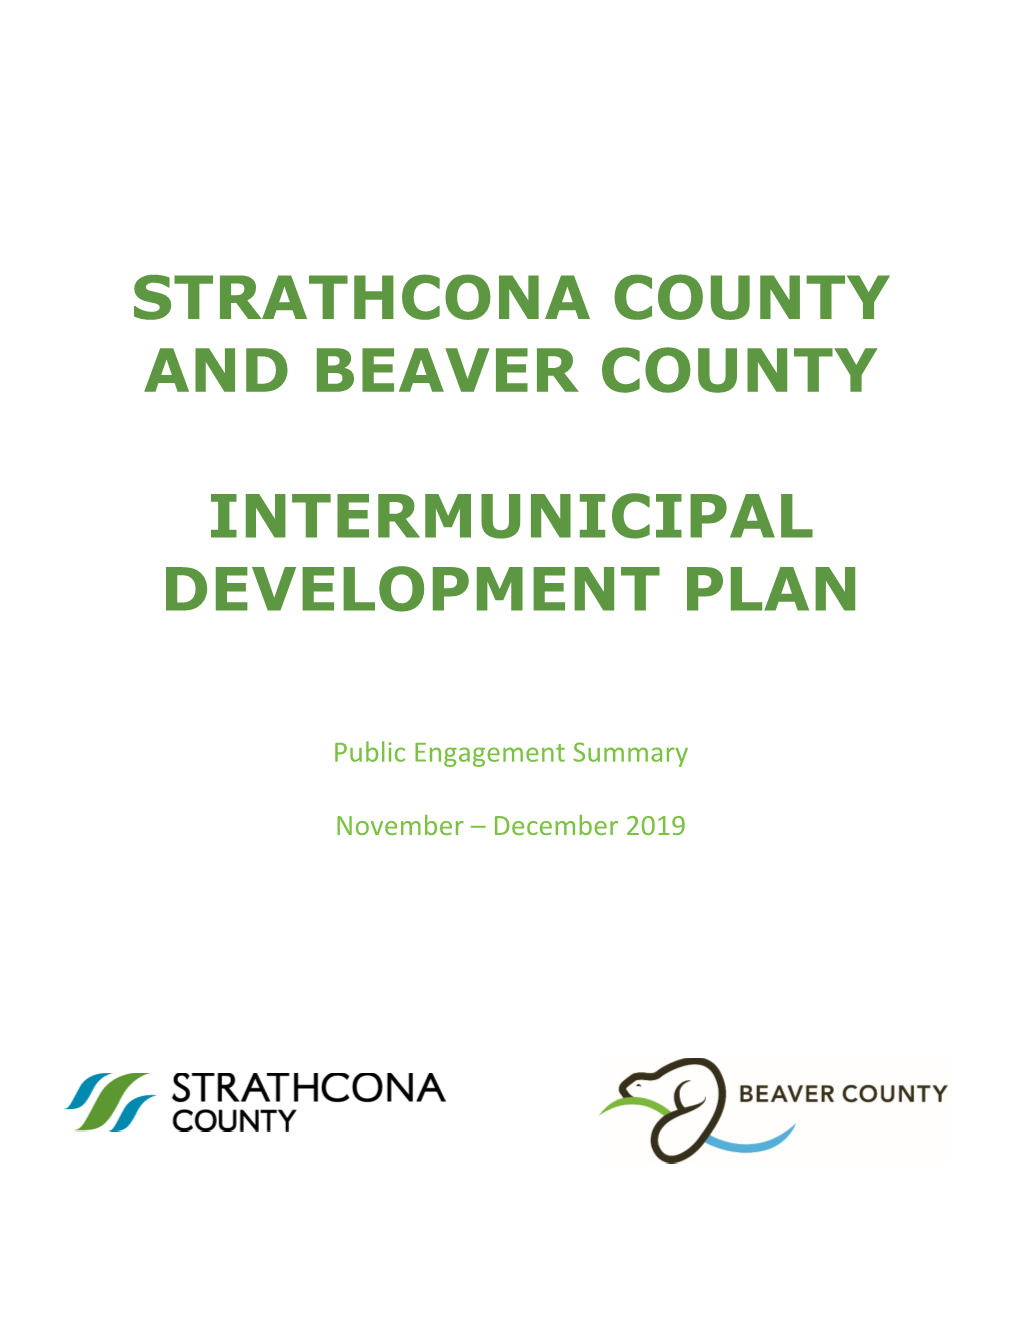 Strathcona County and Beaver County Public Engagement Summary